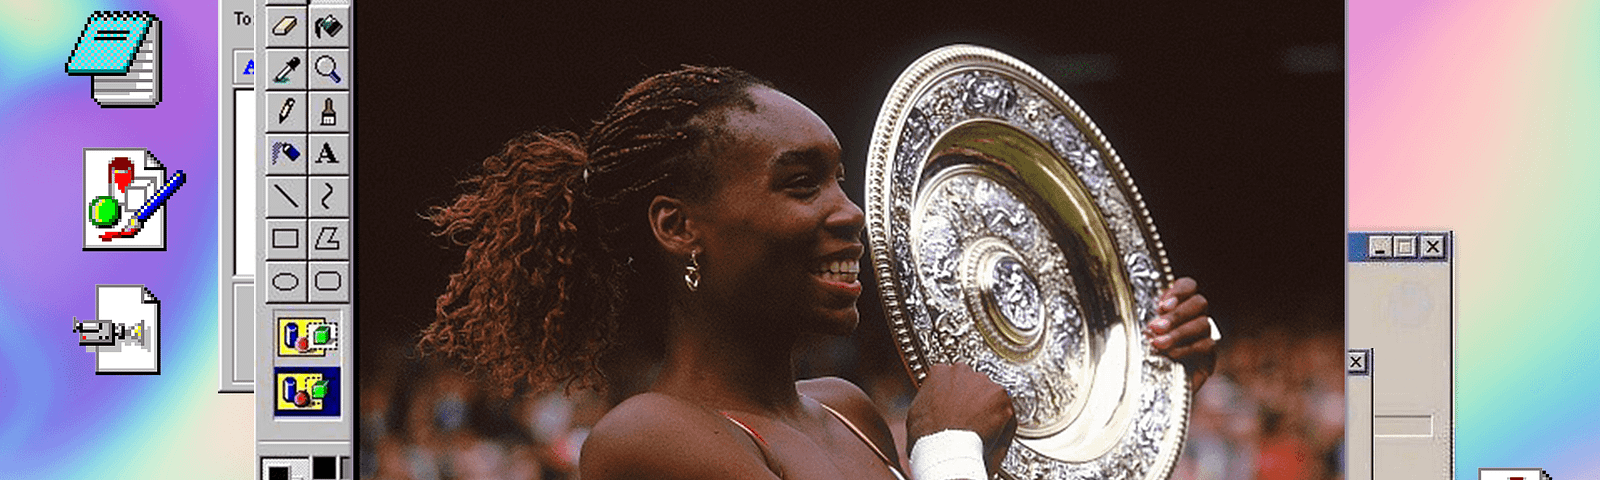 Venus Williams holding her Wimbledon trophy in 2000 on a Windows 95 desktop with a rainbow gradient background.